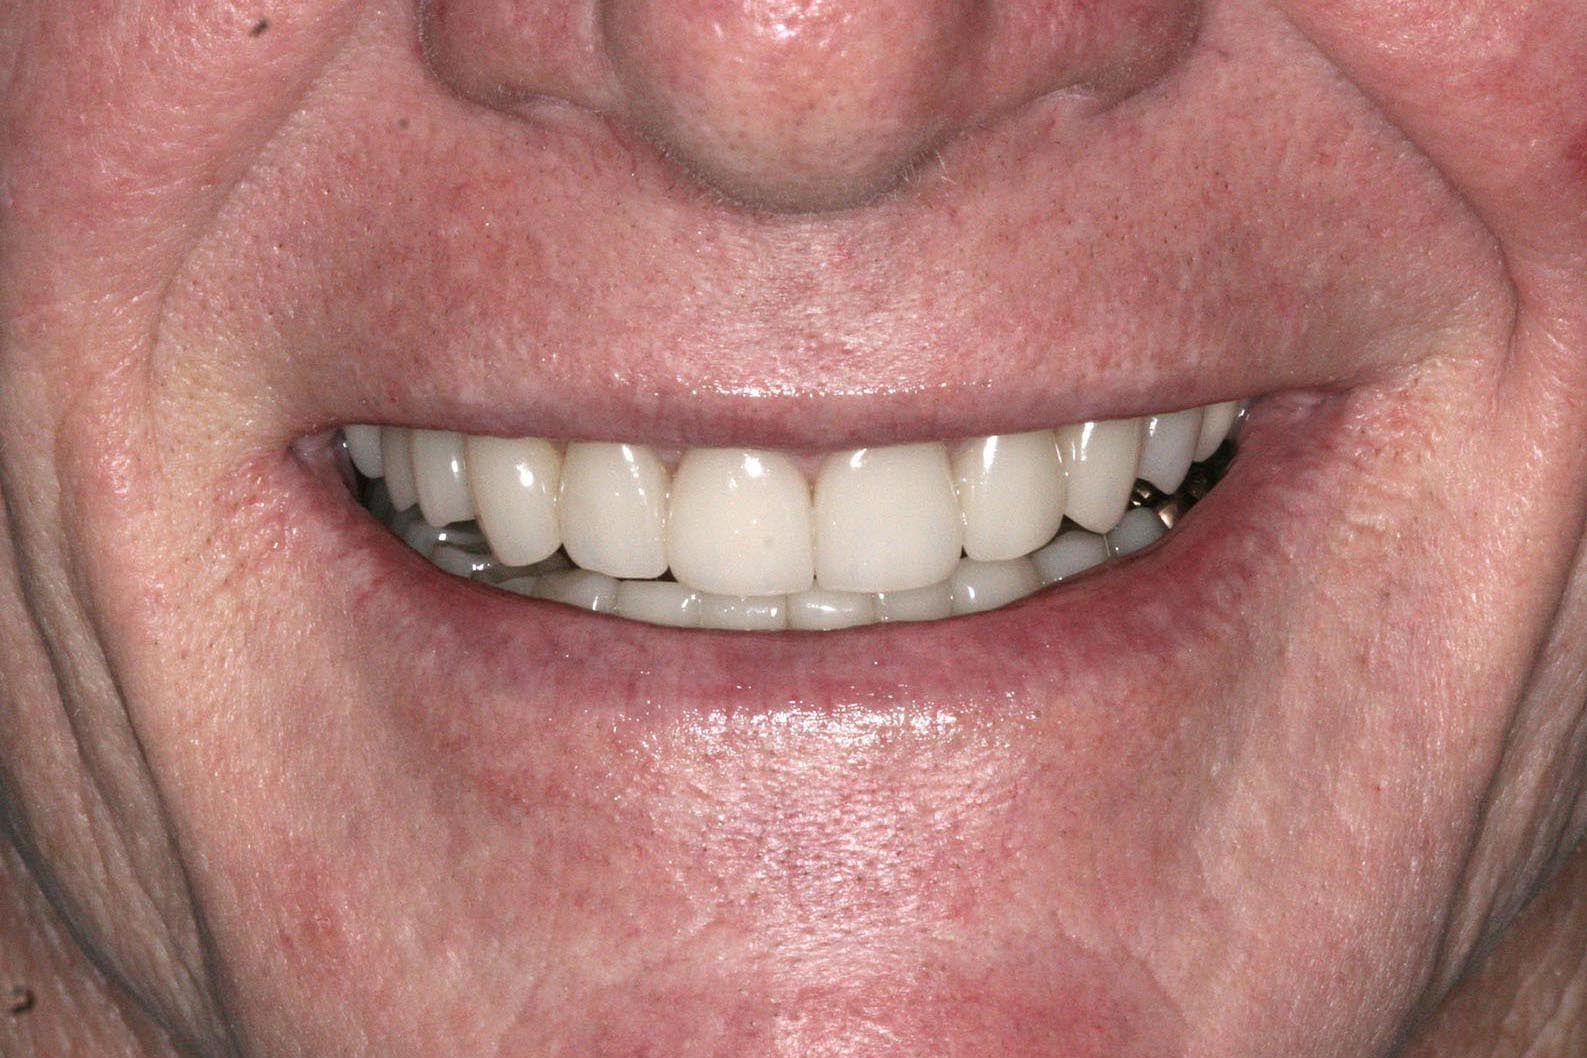 After adding crowns onlays and veneers